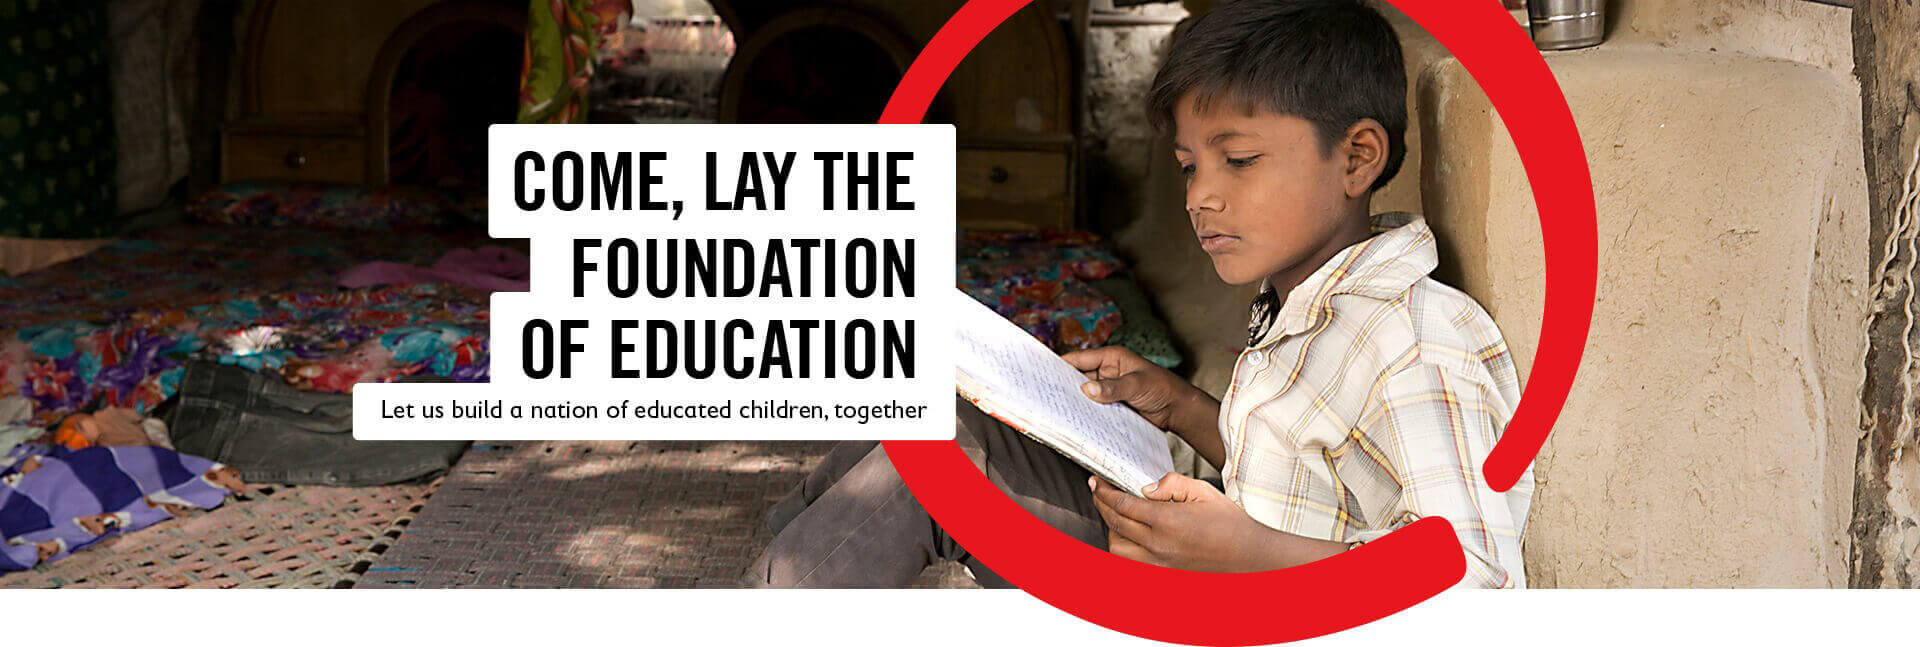 how to educate poor child in India